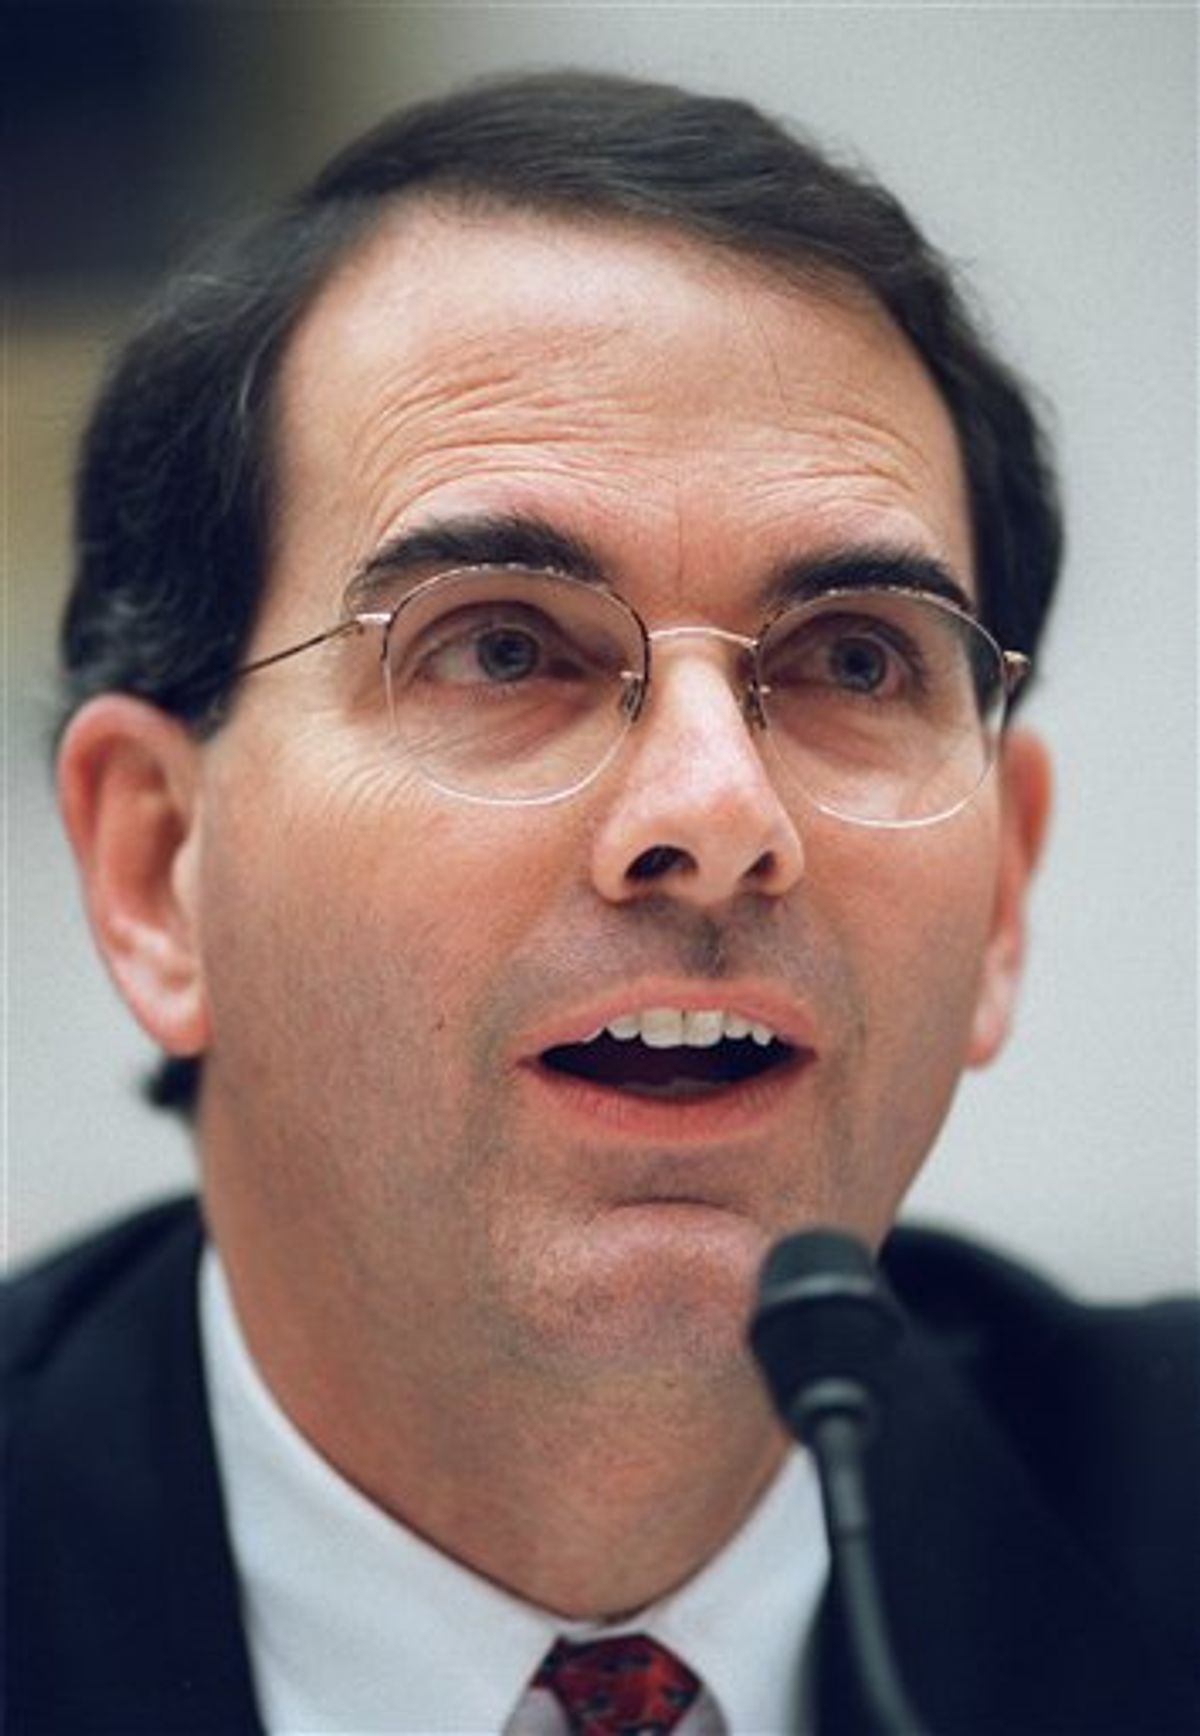 FILE - In this Feb. 14, 2002 file photo, Jay Bybee testifies on Capitol Hill in Washington. (AP Photo/Evan Vucci, File) (AP)